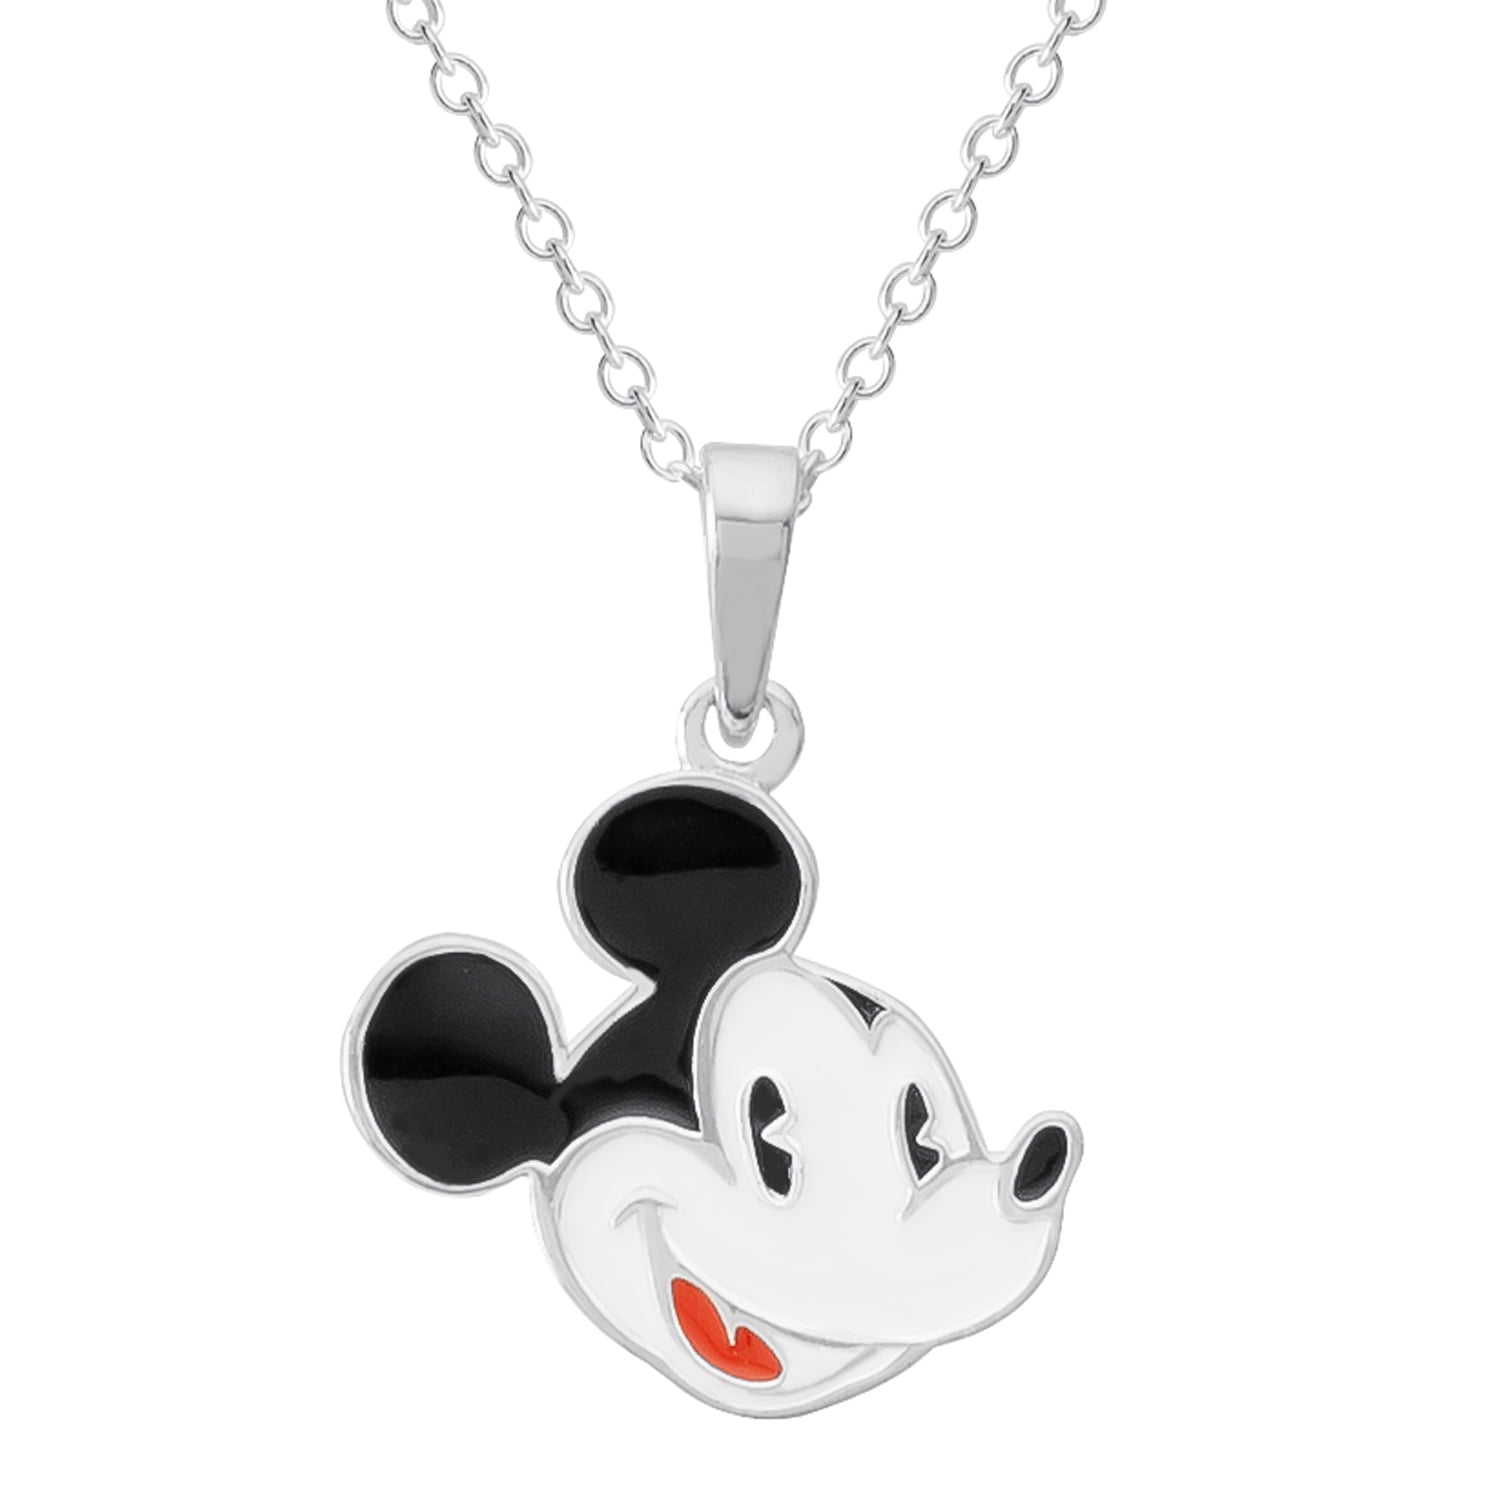 DISNEY MINNIE OR MICKEY MOUSE ENAMEL PENDANT NECKLACE 925 STERLING SILVER CHAIN 